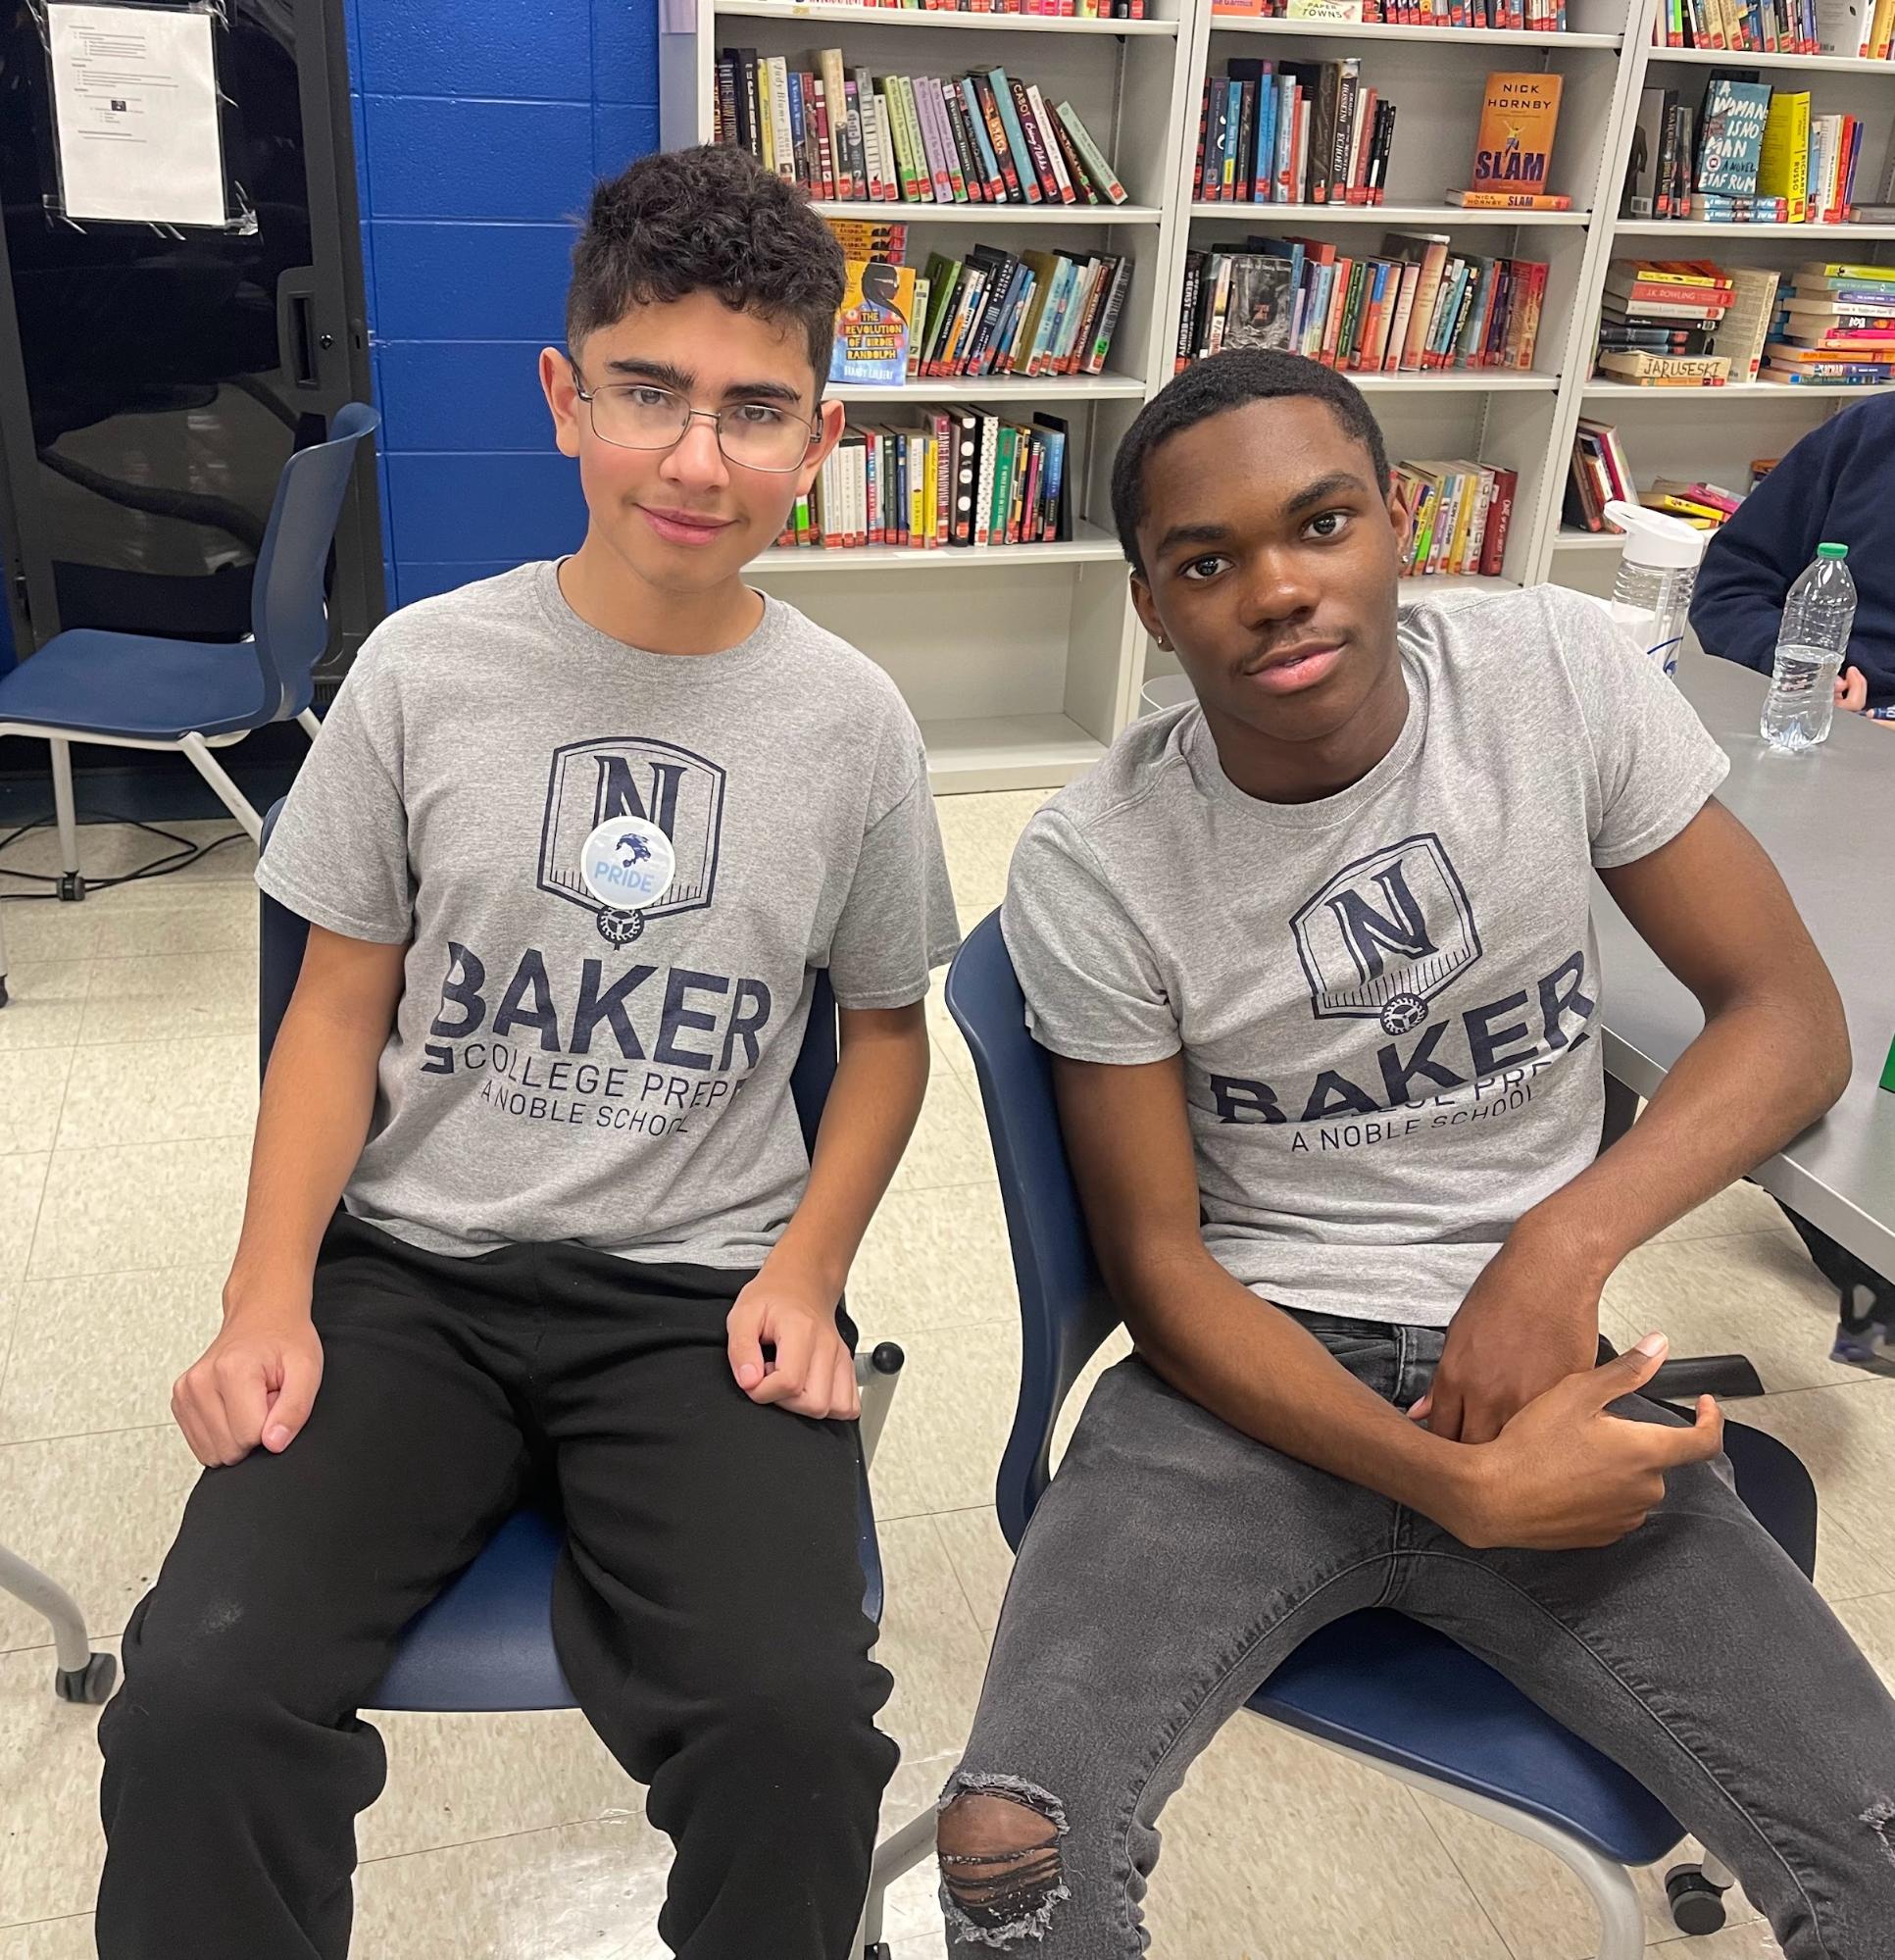 In this photo, Zayden, a freshman at Baker College Prep, is sitting beside his mentor, Tavin, a senior at Baker. They are both smiling at the camera.